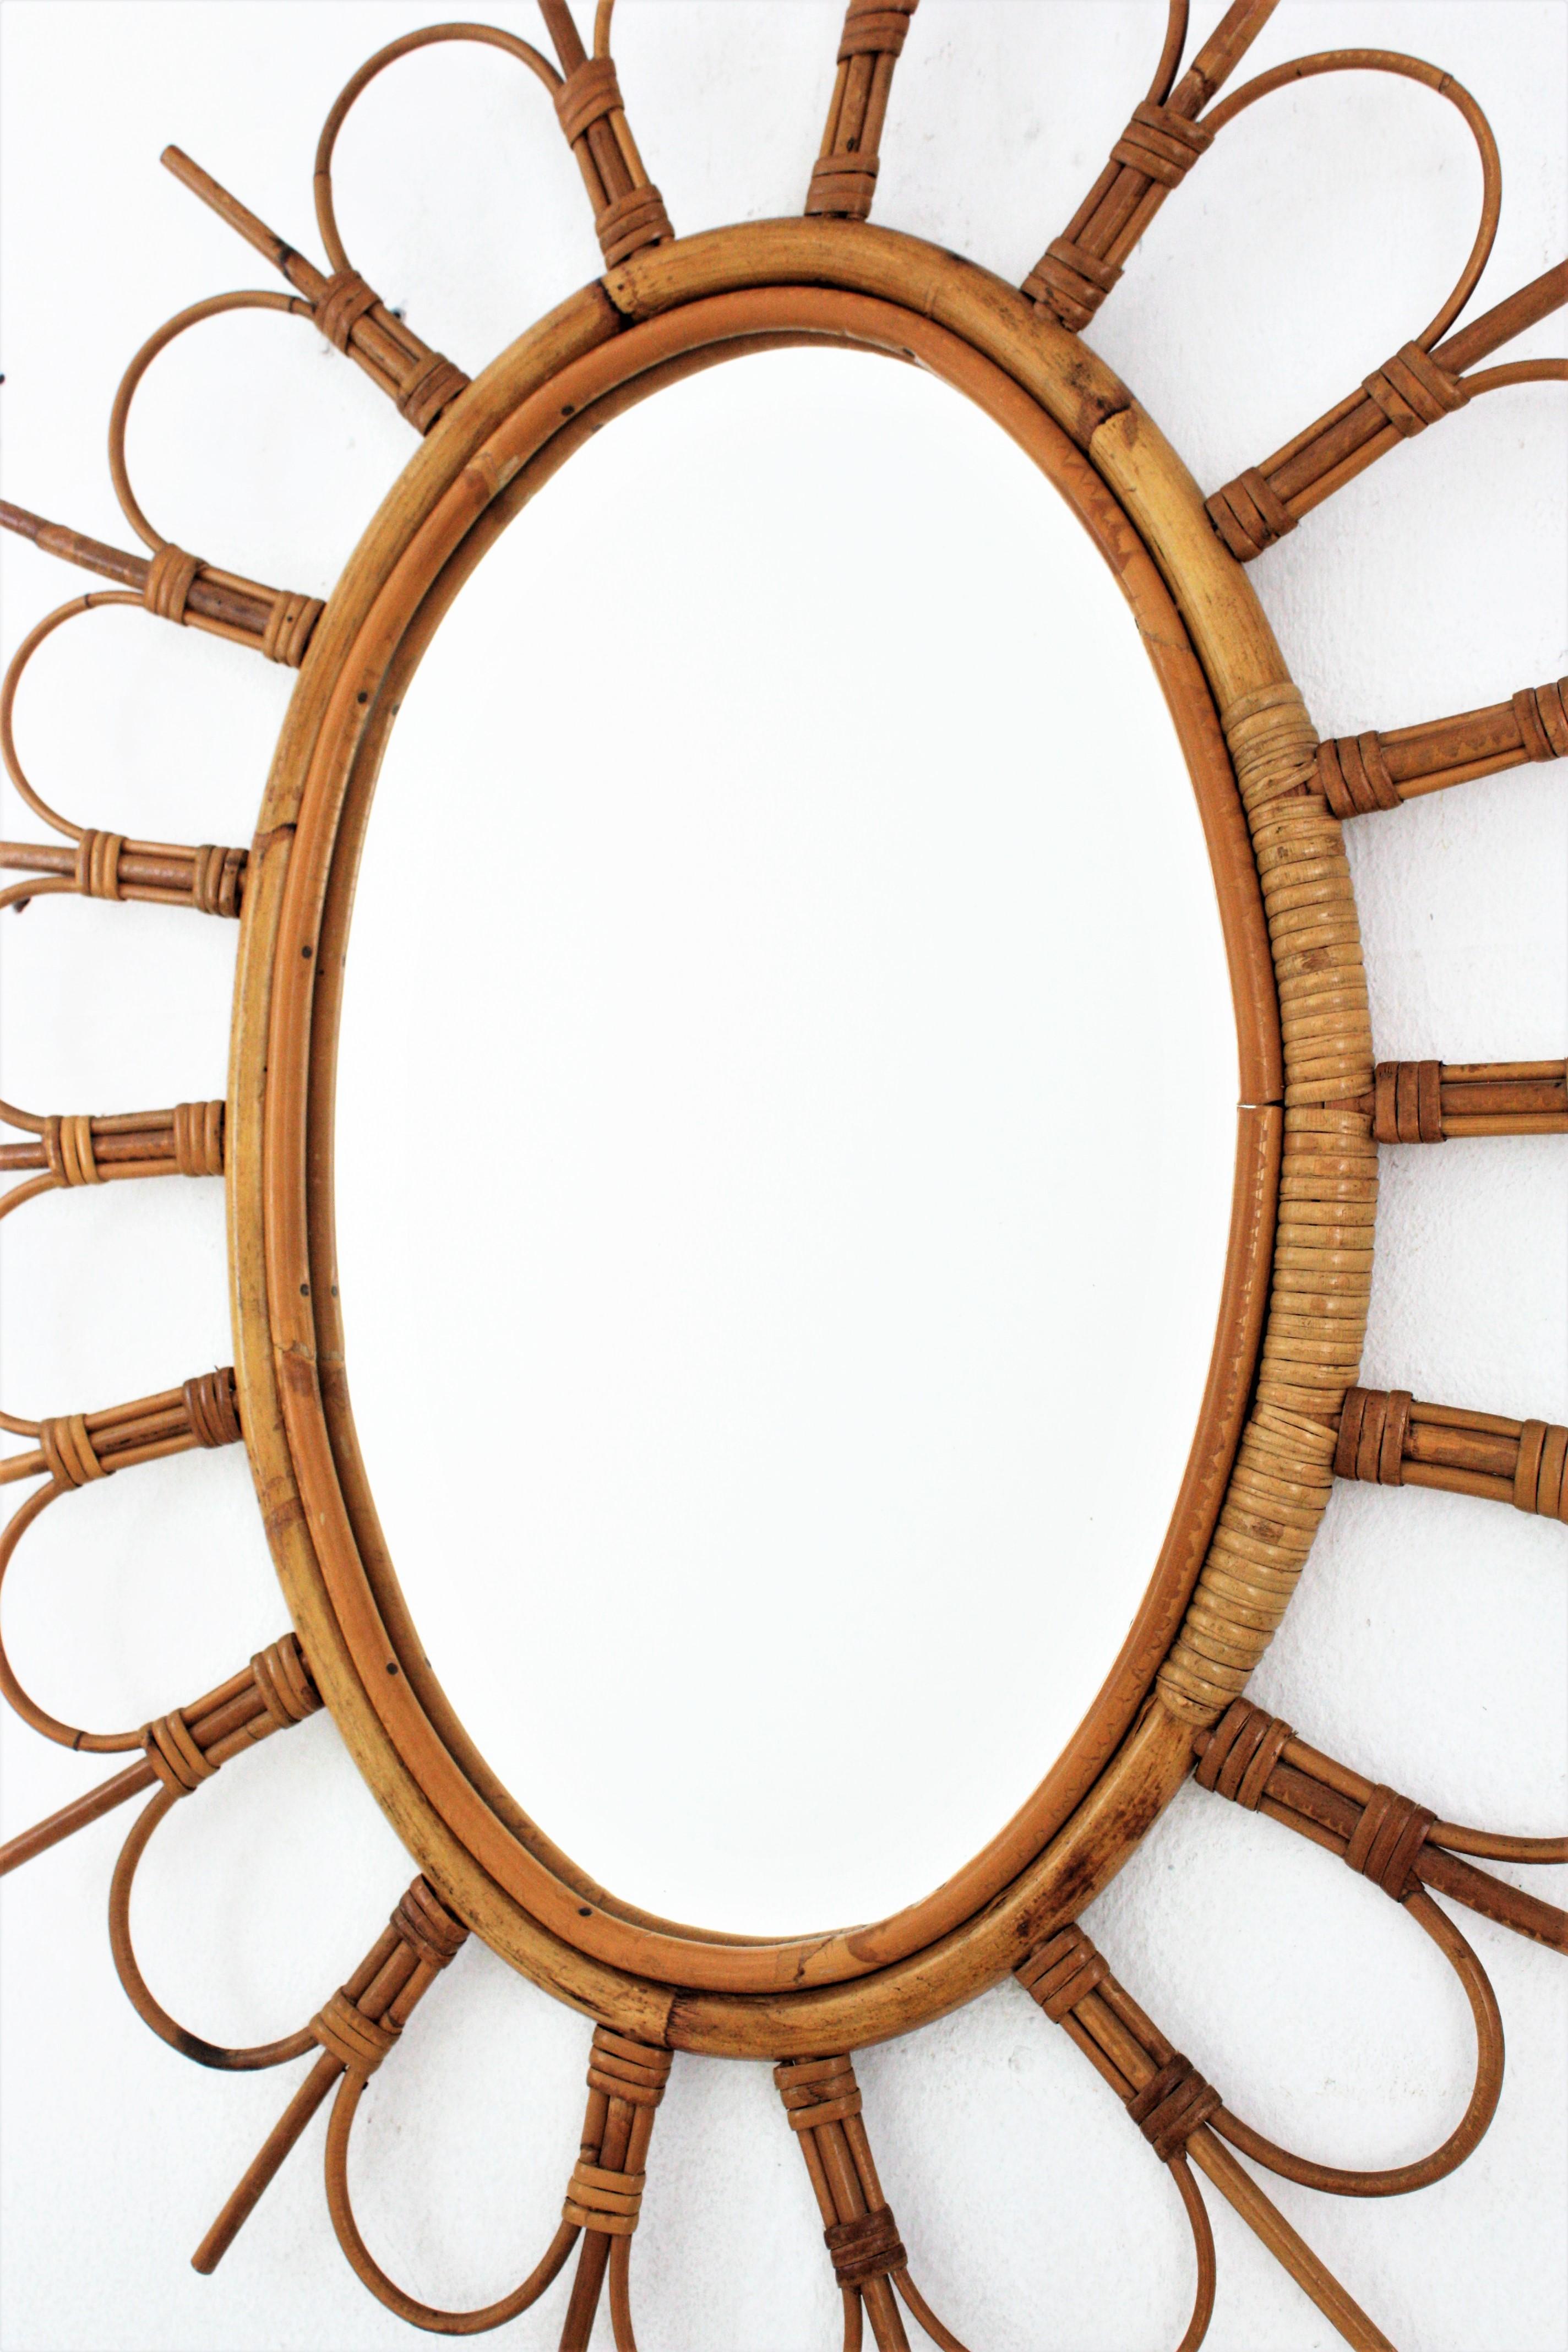 20th Century Rattan Oval Sunburst Flower Mirror from France, 1960s For Sale